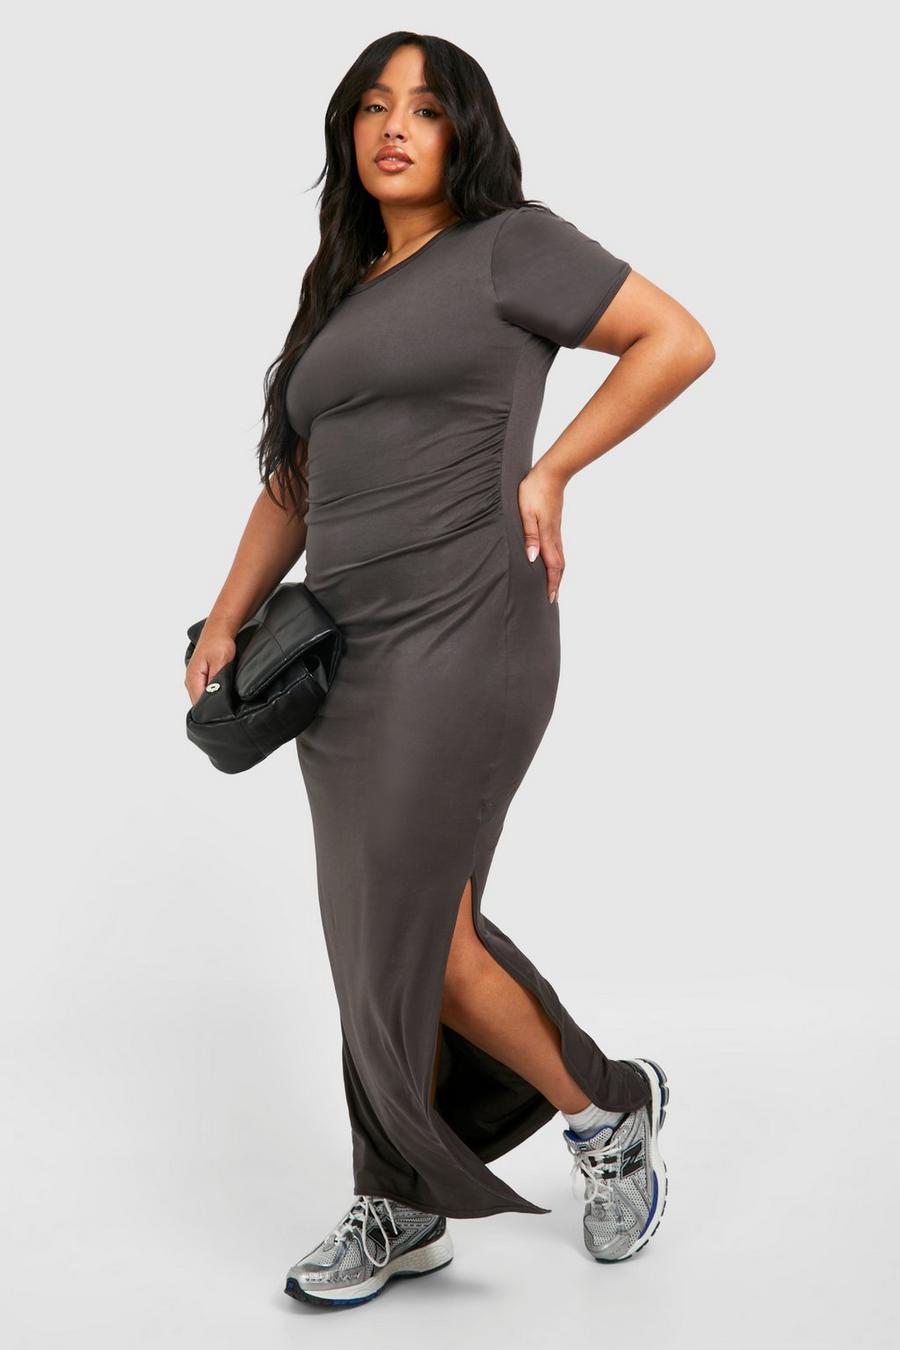 Chic super plus size clothing In A Variety Of Stylish Designs 